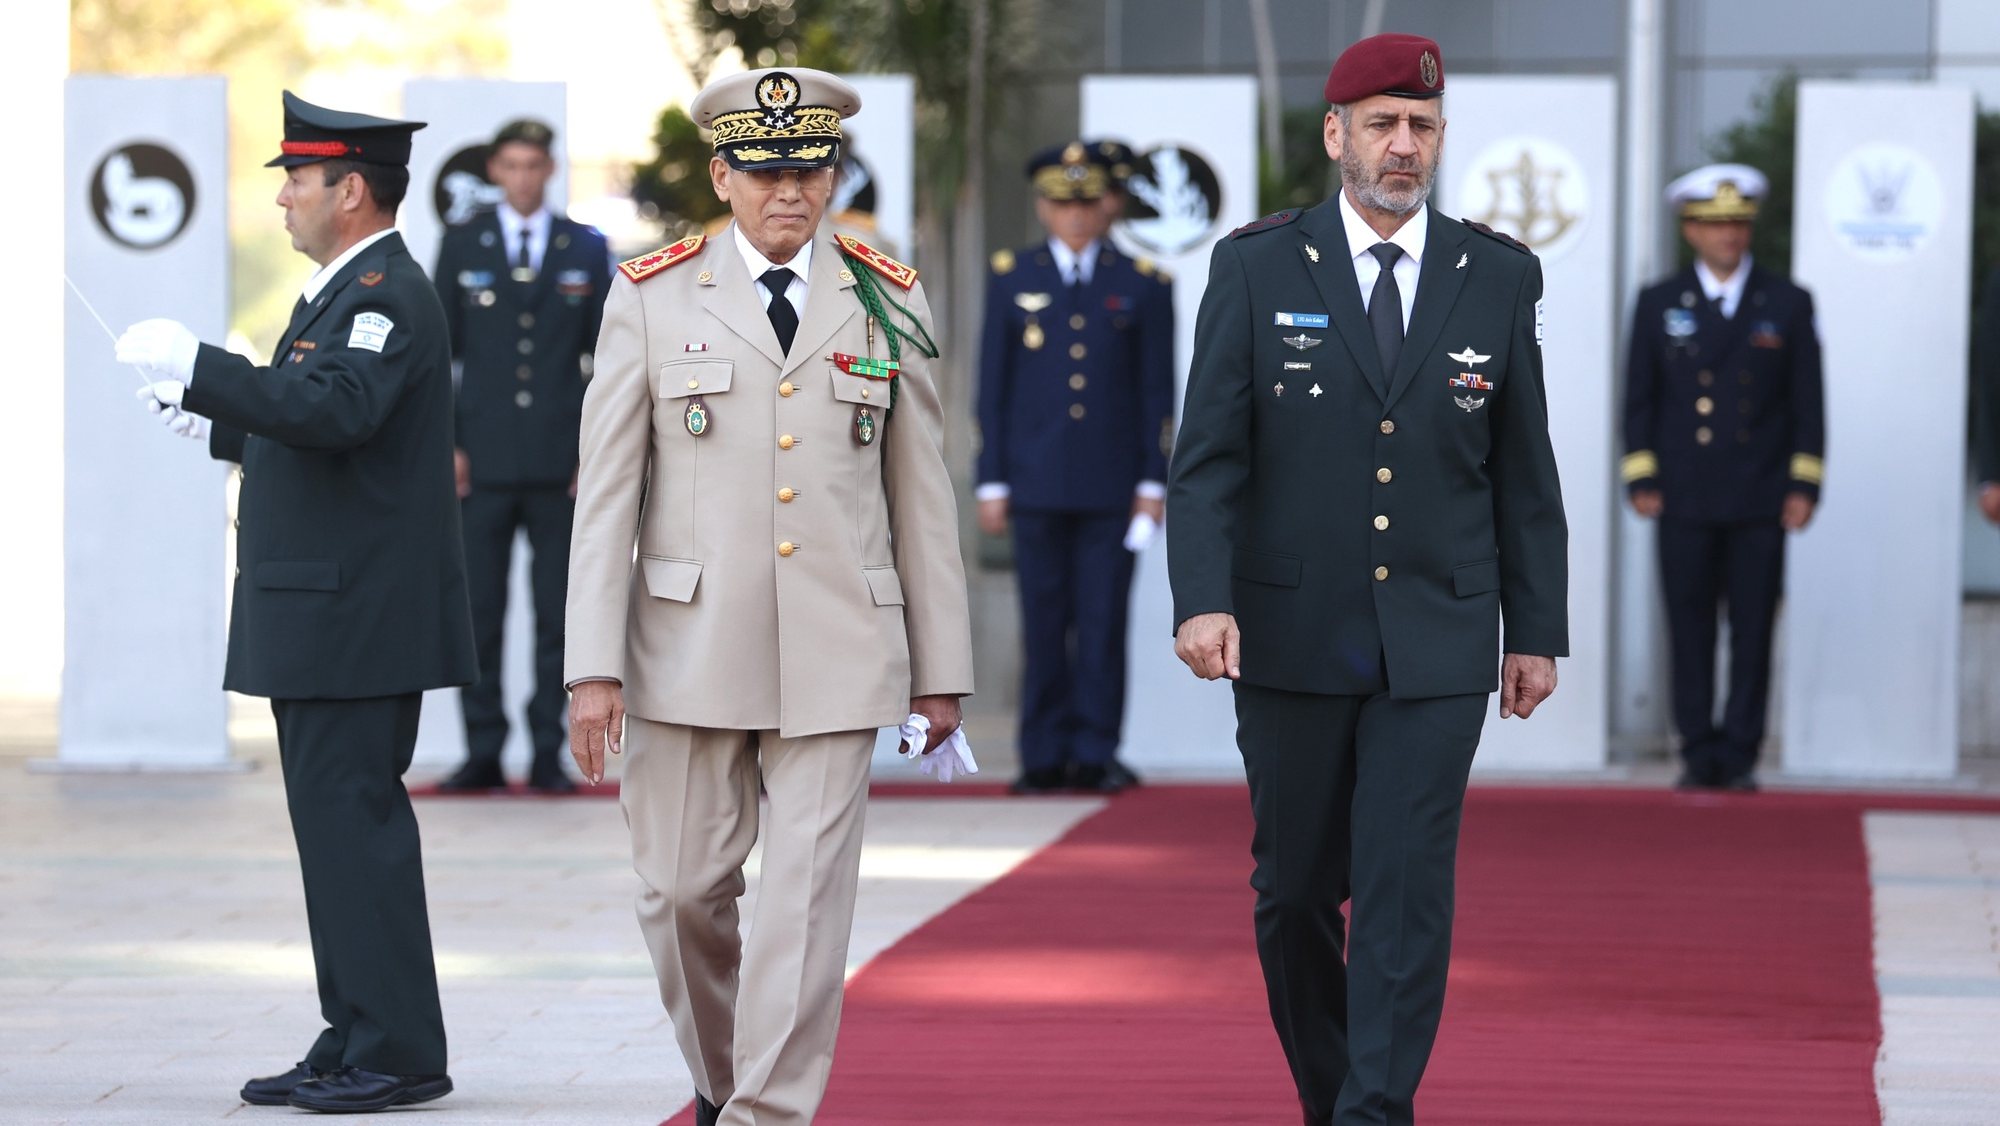 epa10180846 Israeli Army Chief of Staff Aviv Kochavi (R) welcomes the Inspector General of the Royal Armed Forces of Morocco Lieutenant General Belkhir El Farouk (L) at the Kiryah military base in Tel Aviv, Israel, 13 September 2022. Belkhir El Farouk will attend the international conference on defense innovation organized by the Israeli Defense Forces that runs from 12 to 15 September.  EPA/ABIR SULTAN